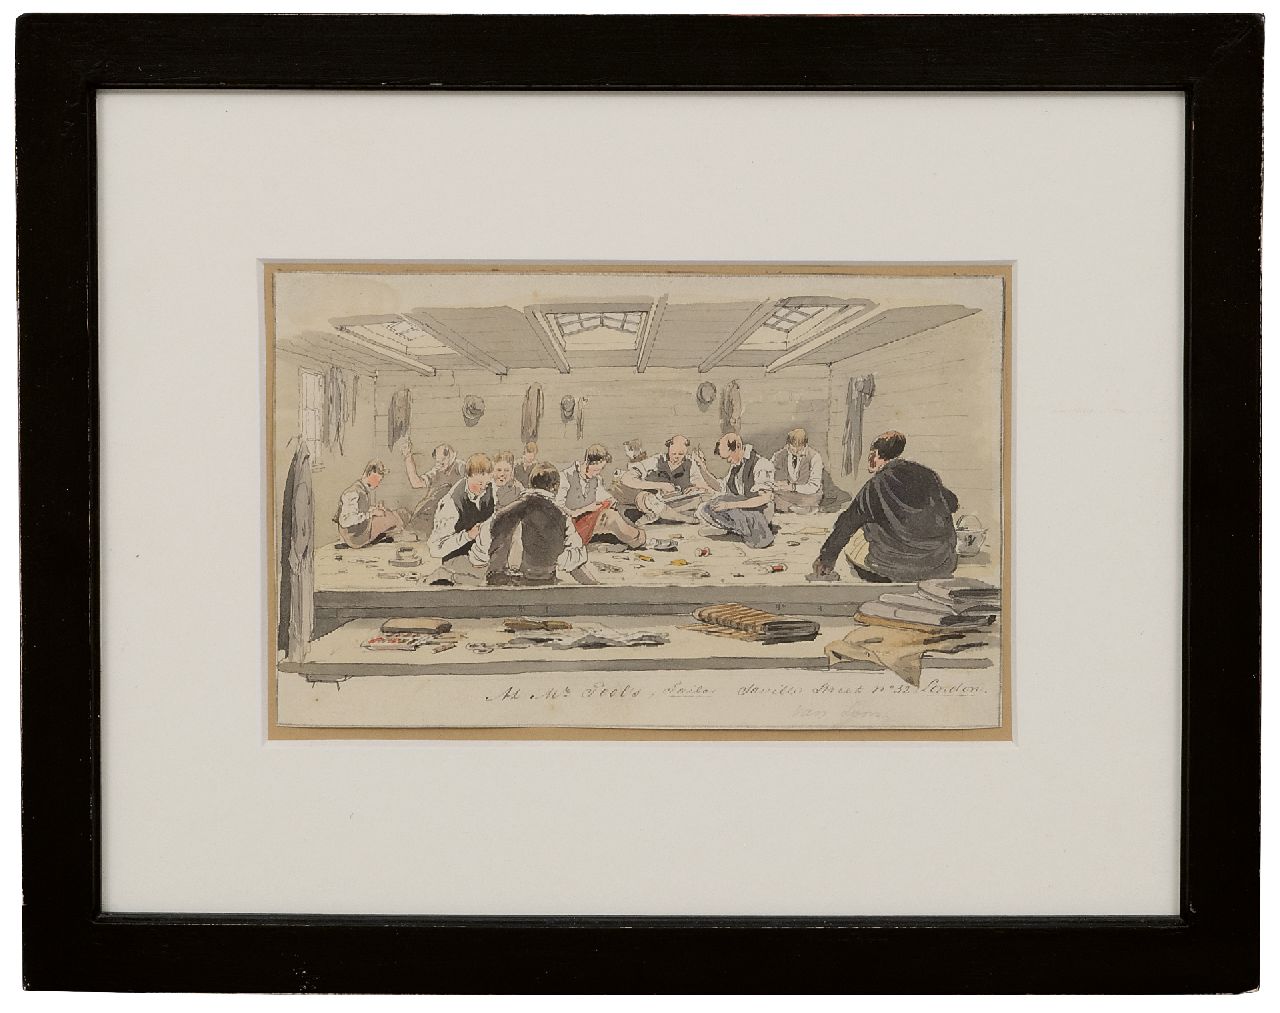 Loon P. van | Pieter van Loon | Watercolours and drawings offered for sale | At the tailor in Saville Street, London, watercolour on paper 12.1 x 19.2 cm, signed l.r.